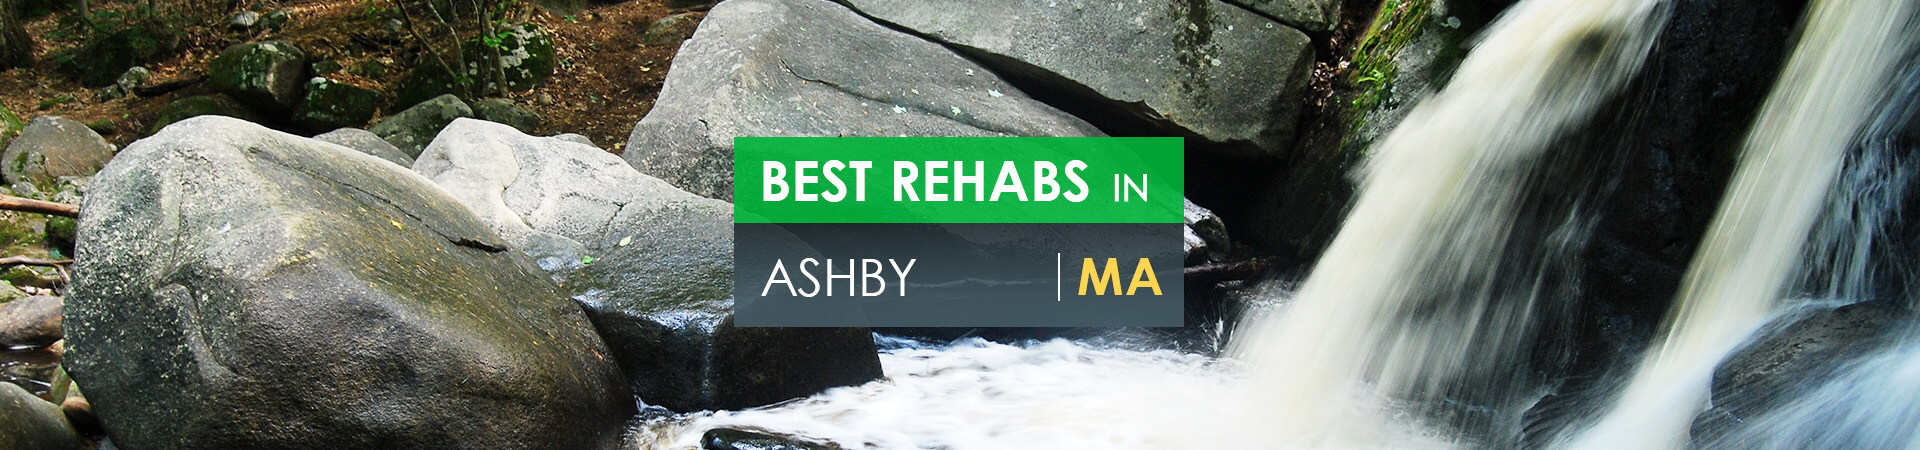 Best rehabs in Ashby, MA